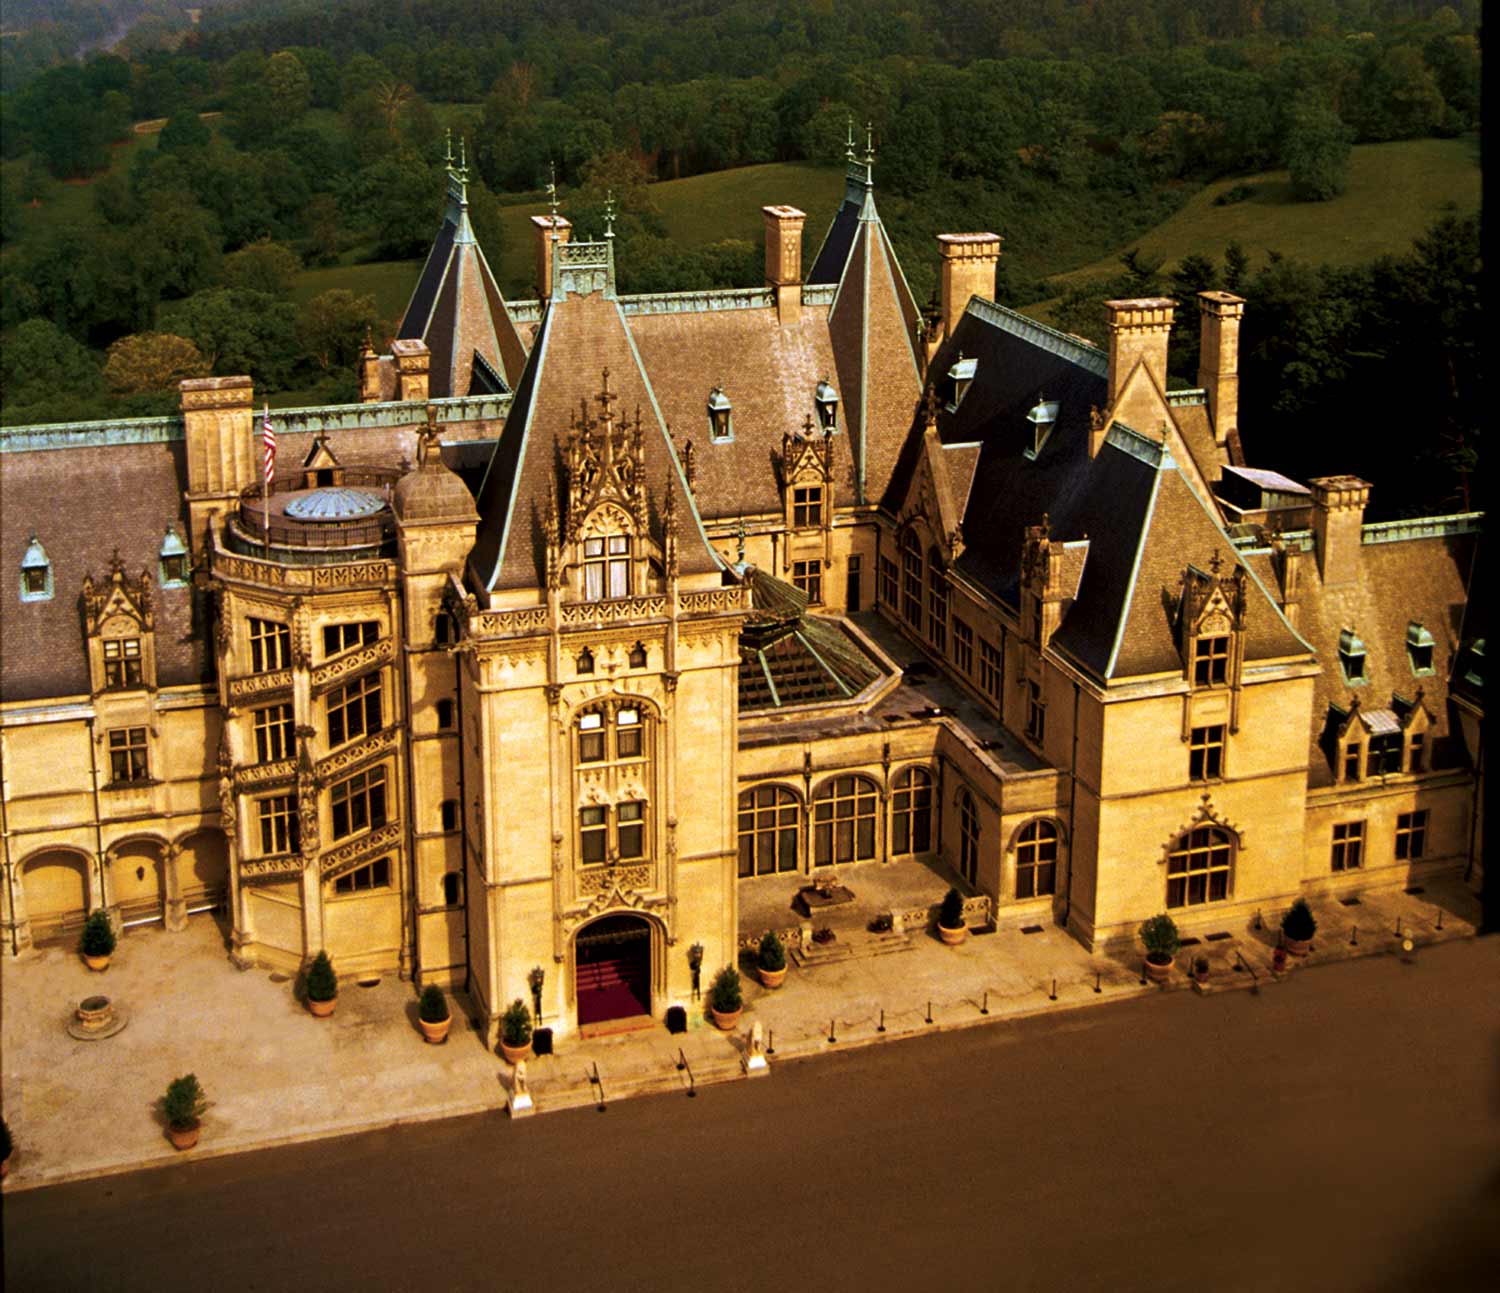 Image of an aerial view of the Biltmore Mansion